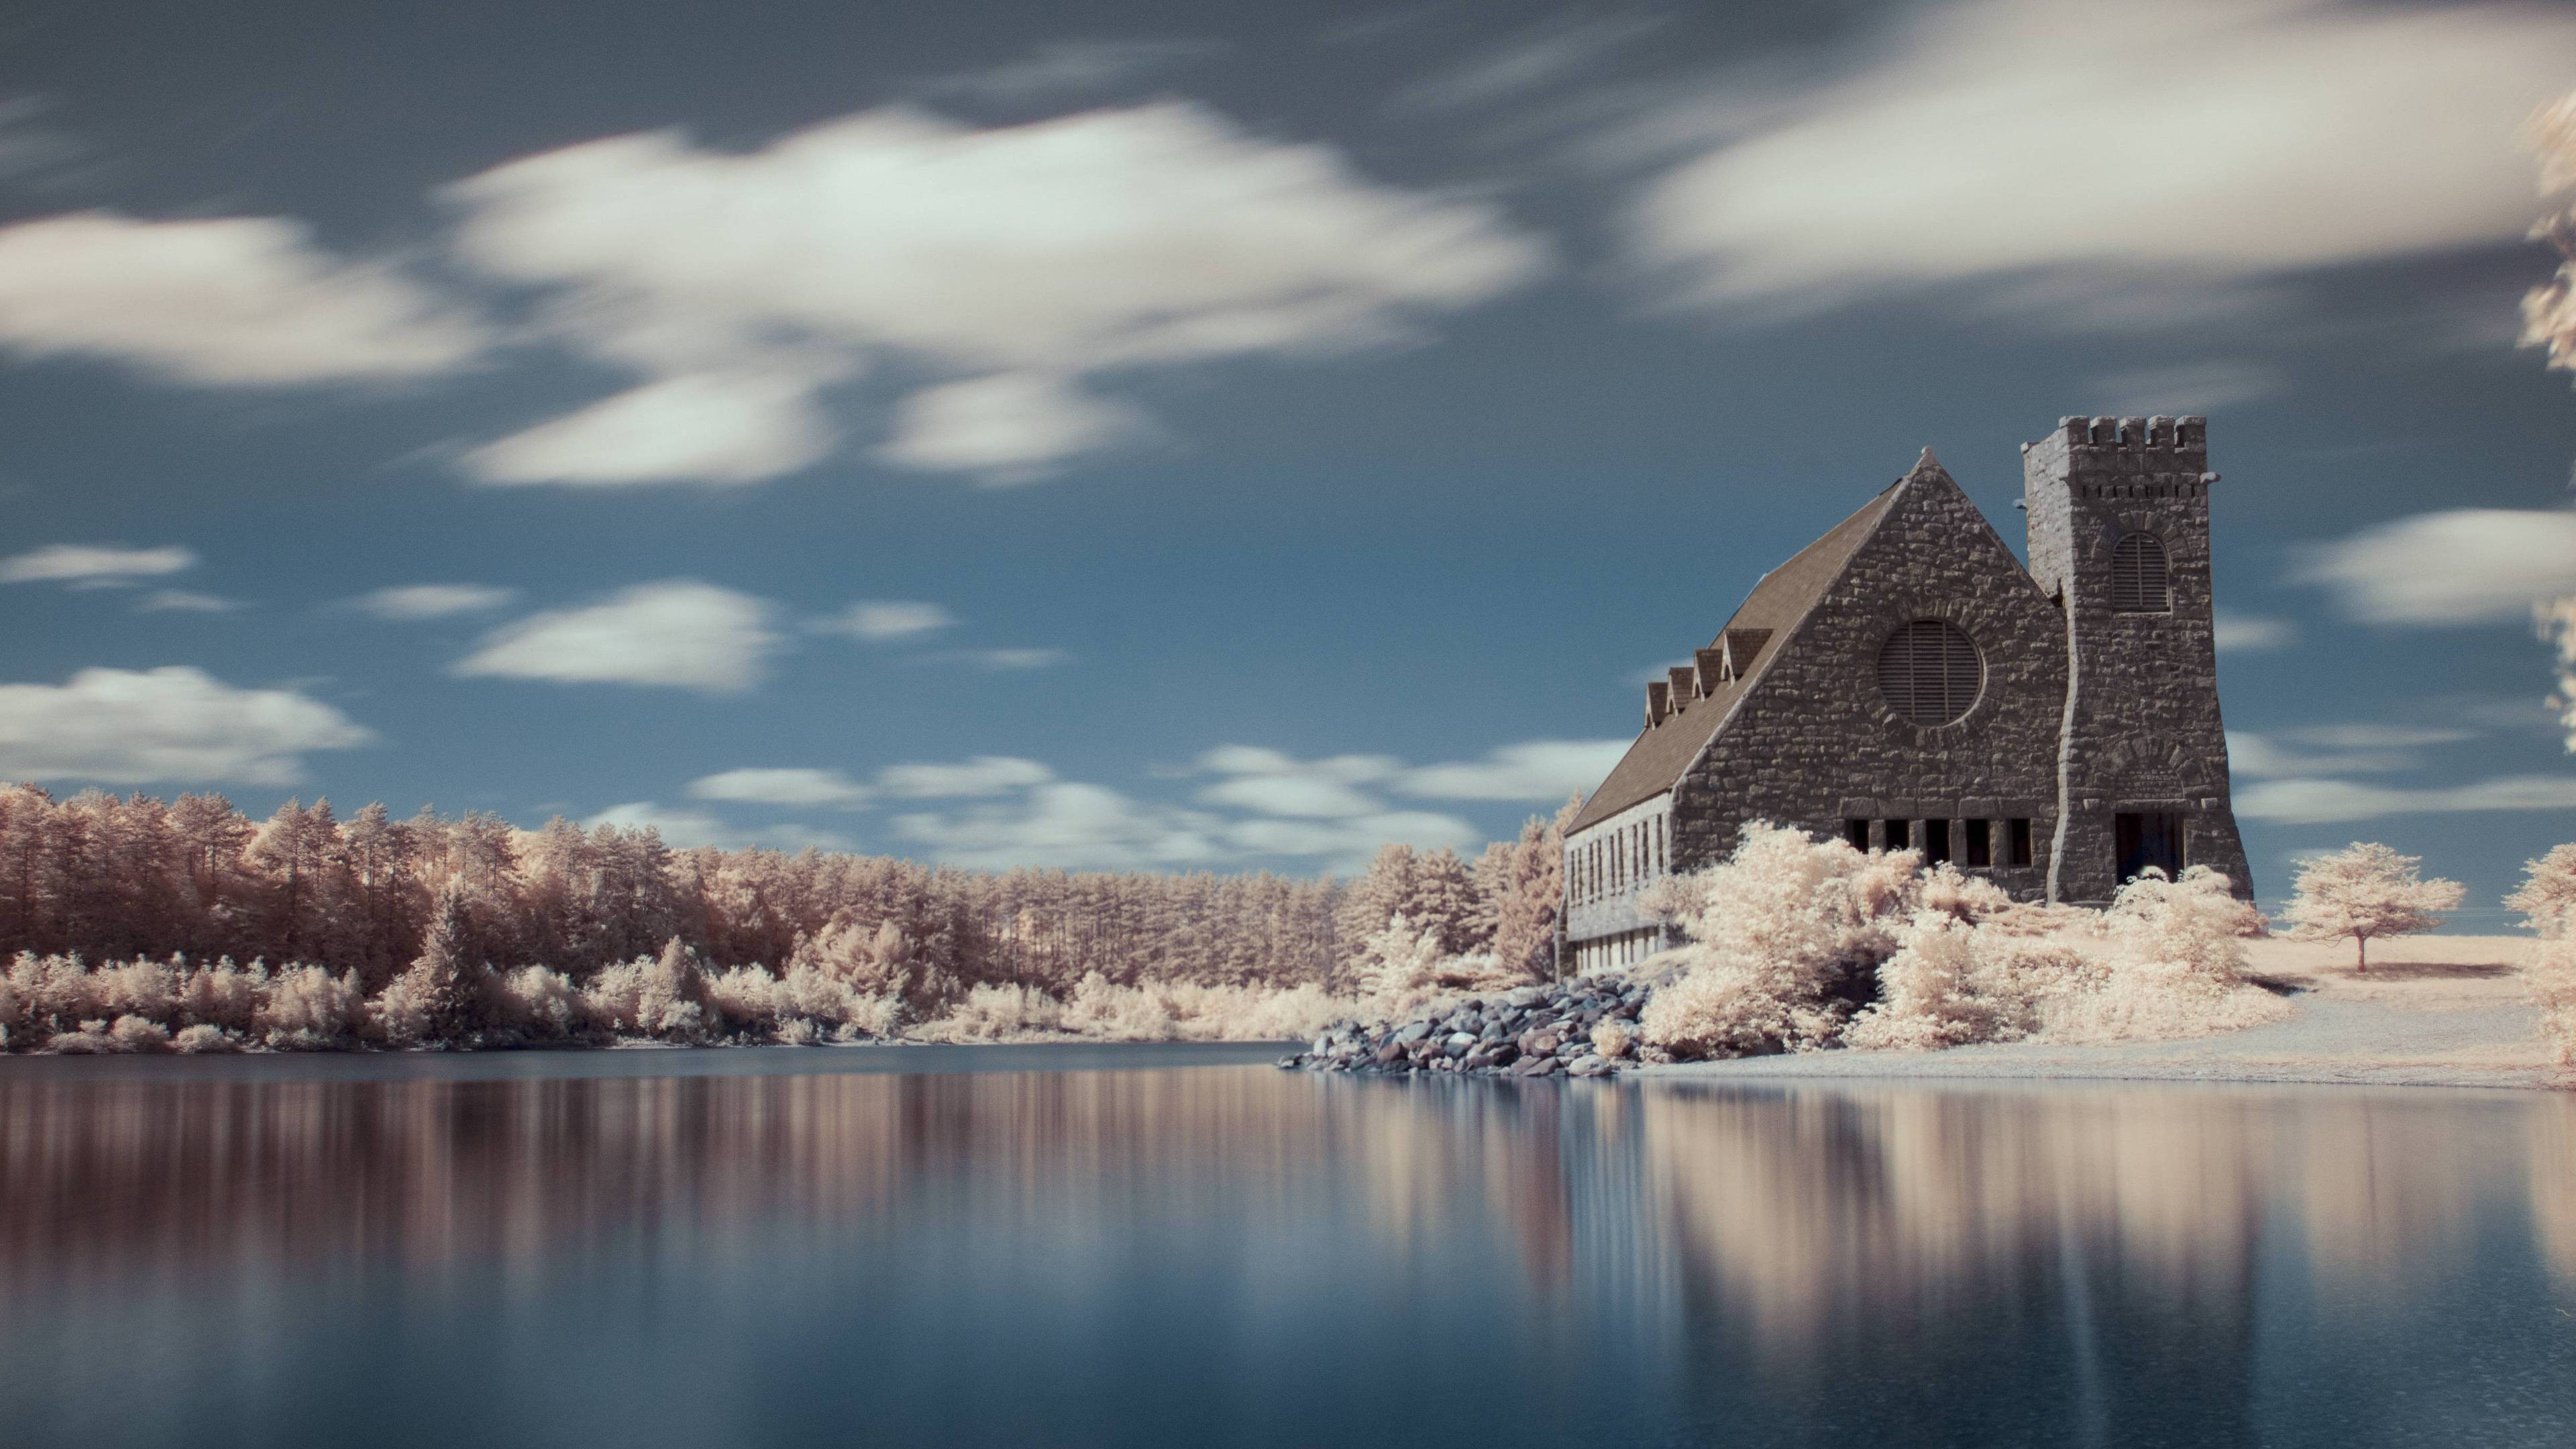 lake, Mansions, House, Old Building, Building, White, Clouds, Long Exposure, Sky, Snow, Forest, Calm, Water, Architecture, Surreal Wallpaper